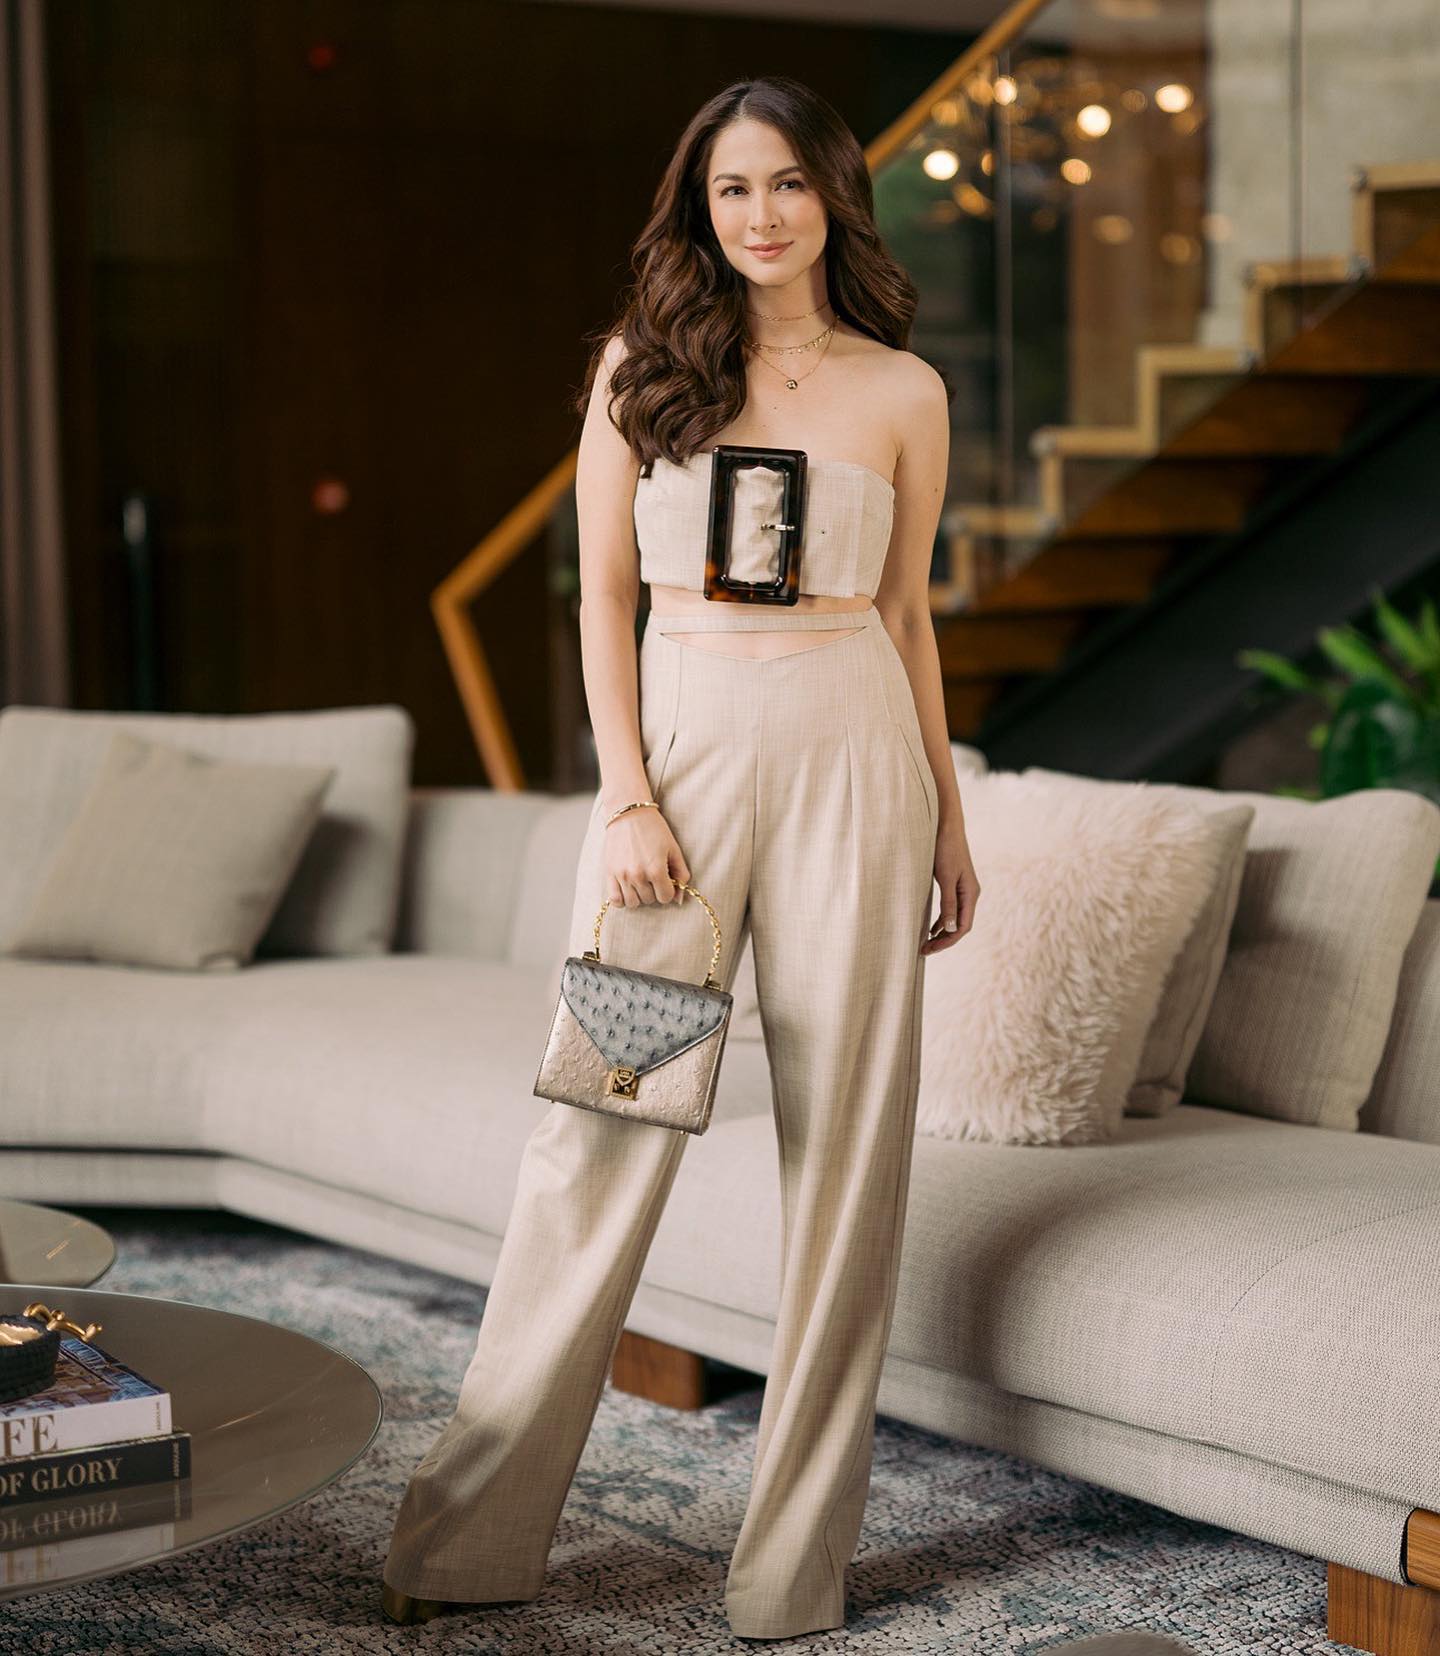 Marian Rivera Wears a P1.8 Million Outfit to Her Contract Renewal with ...